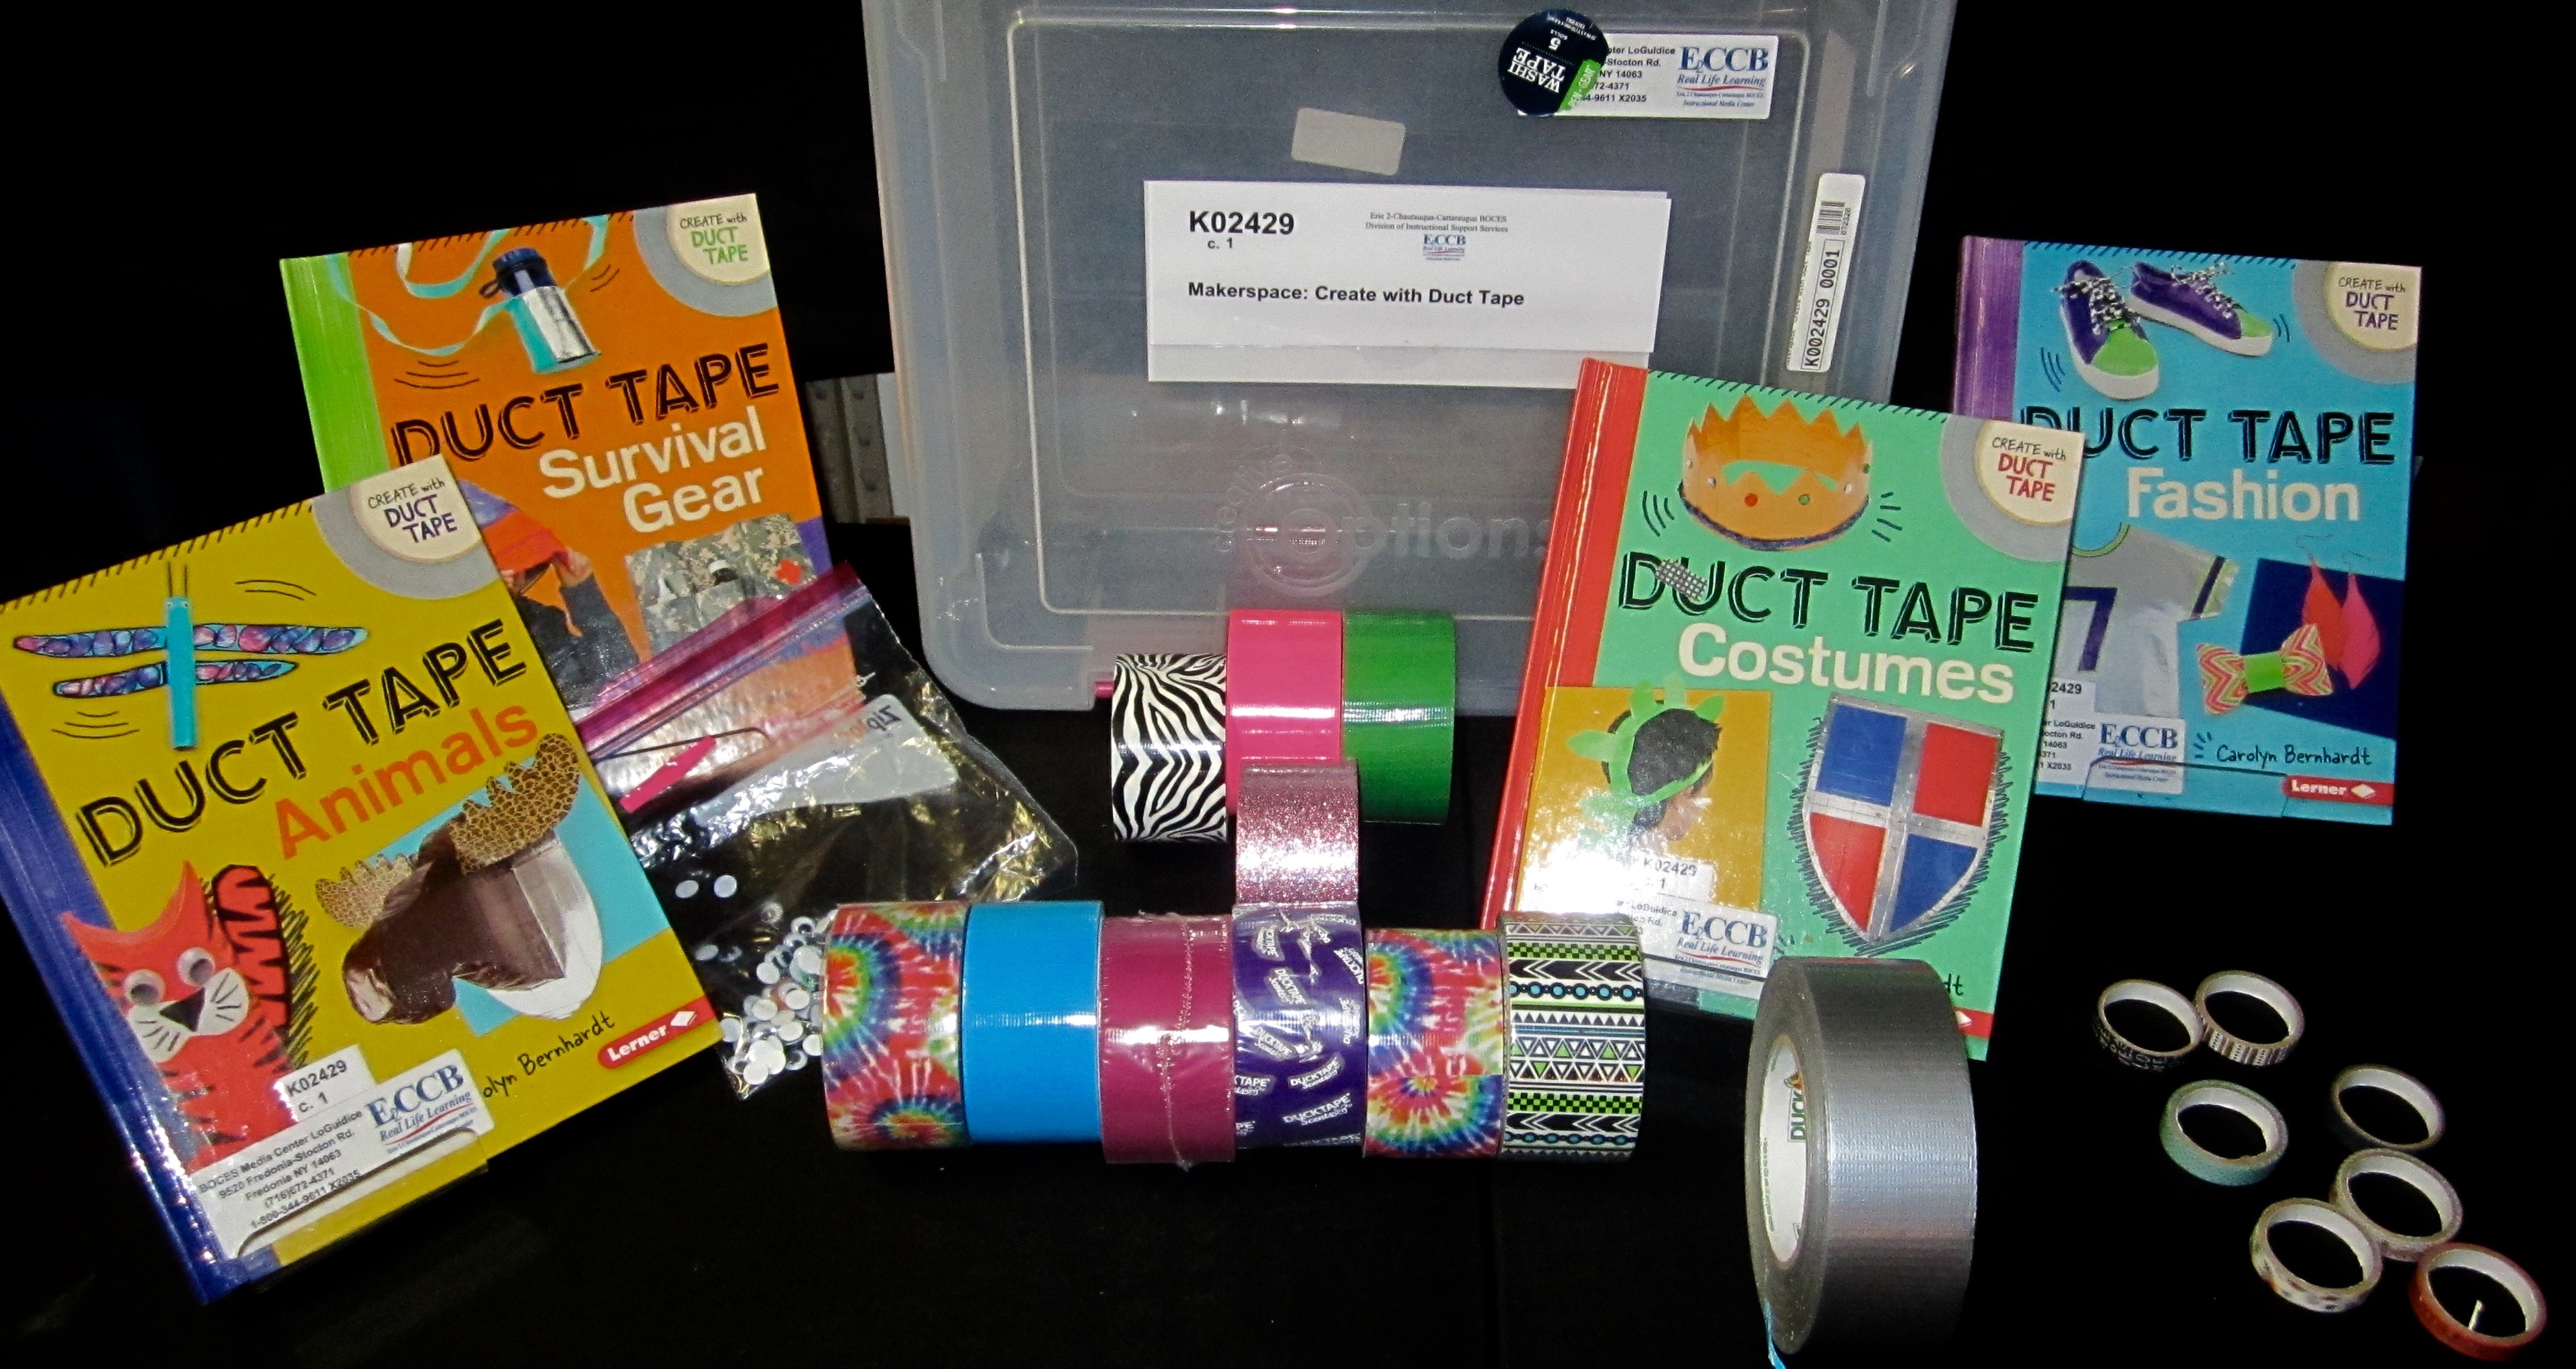 Makerspace: Create with Duct Tape